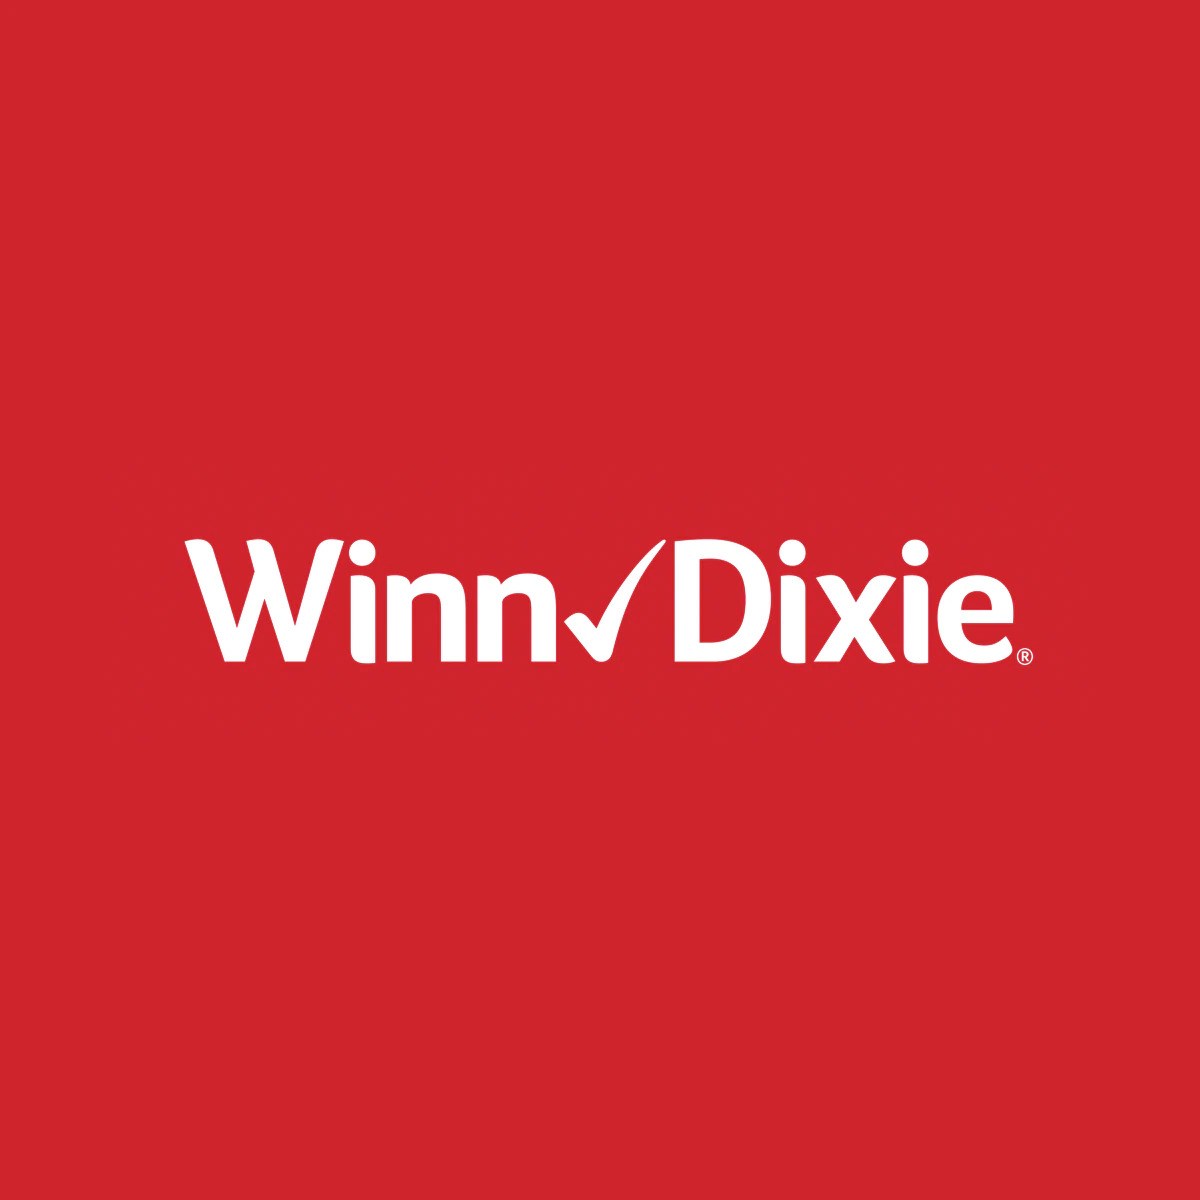 Targeted - Citi Merchant Offers 5% cash back at Winn Dixie on up to $100 purchase